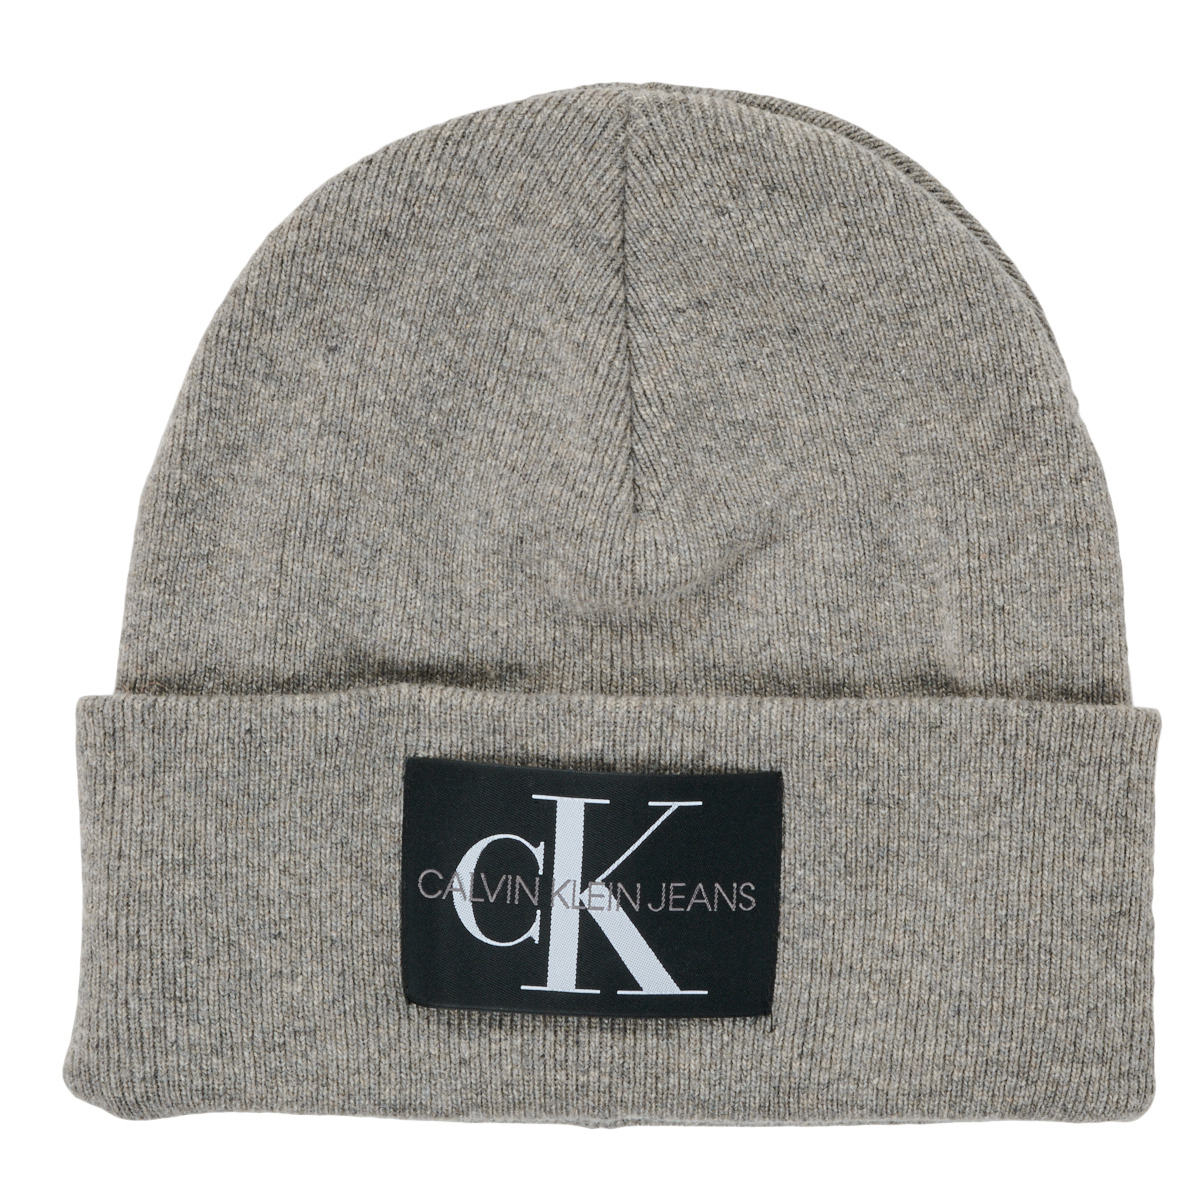 Calvin Klein Grey ! NON-RIB - BEANIE accessories Spartoo delivery PATCH | Free Jeans - hats Clothes MONOLOGO Men NET